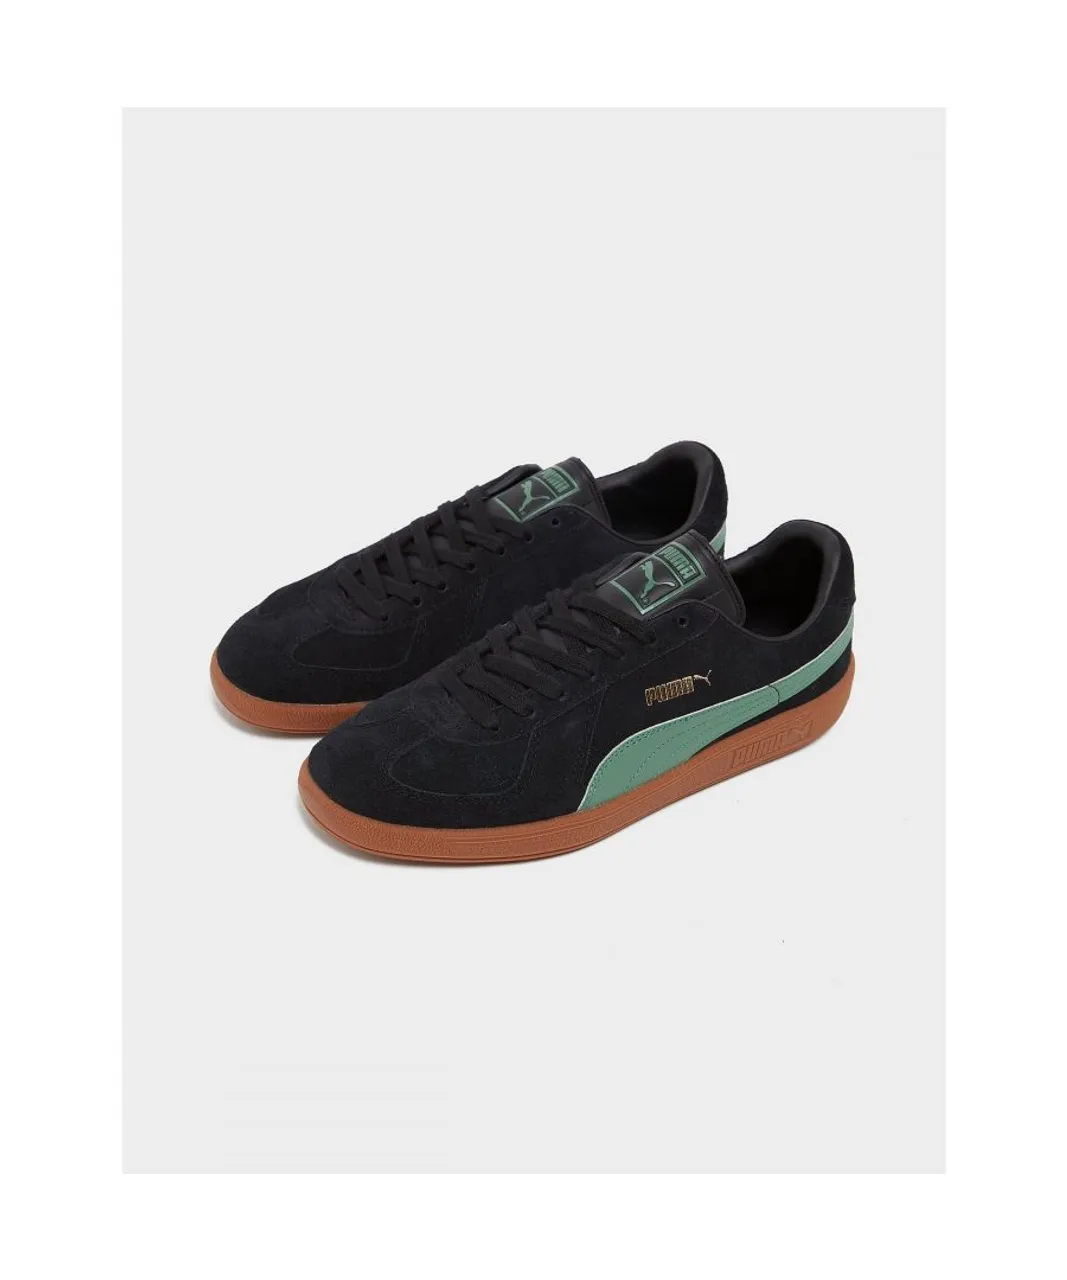 Puma Mens Suede Army Trainers in black blue Leather